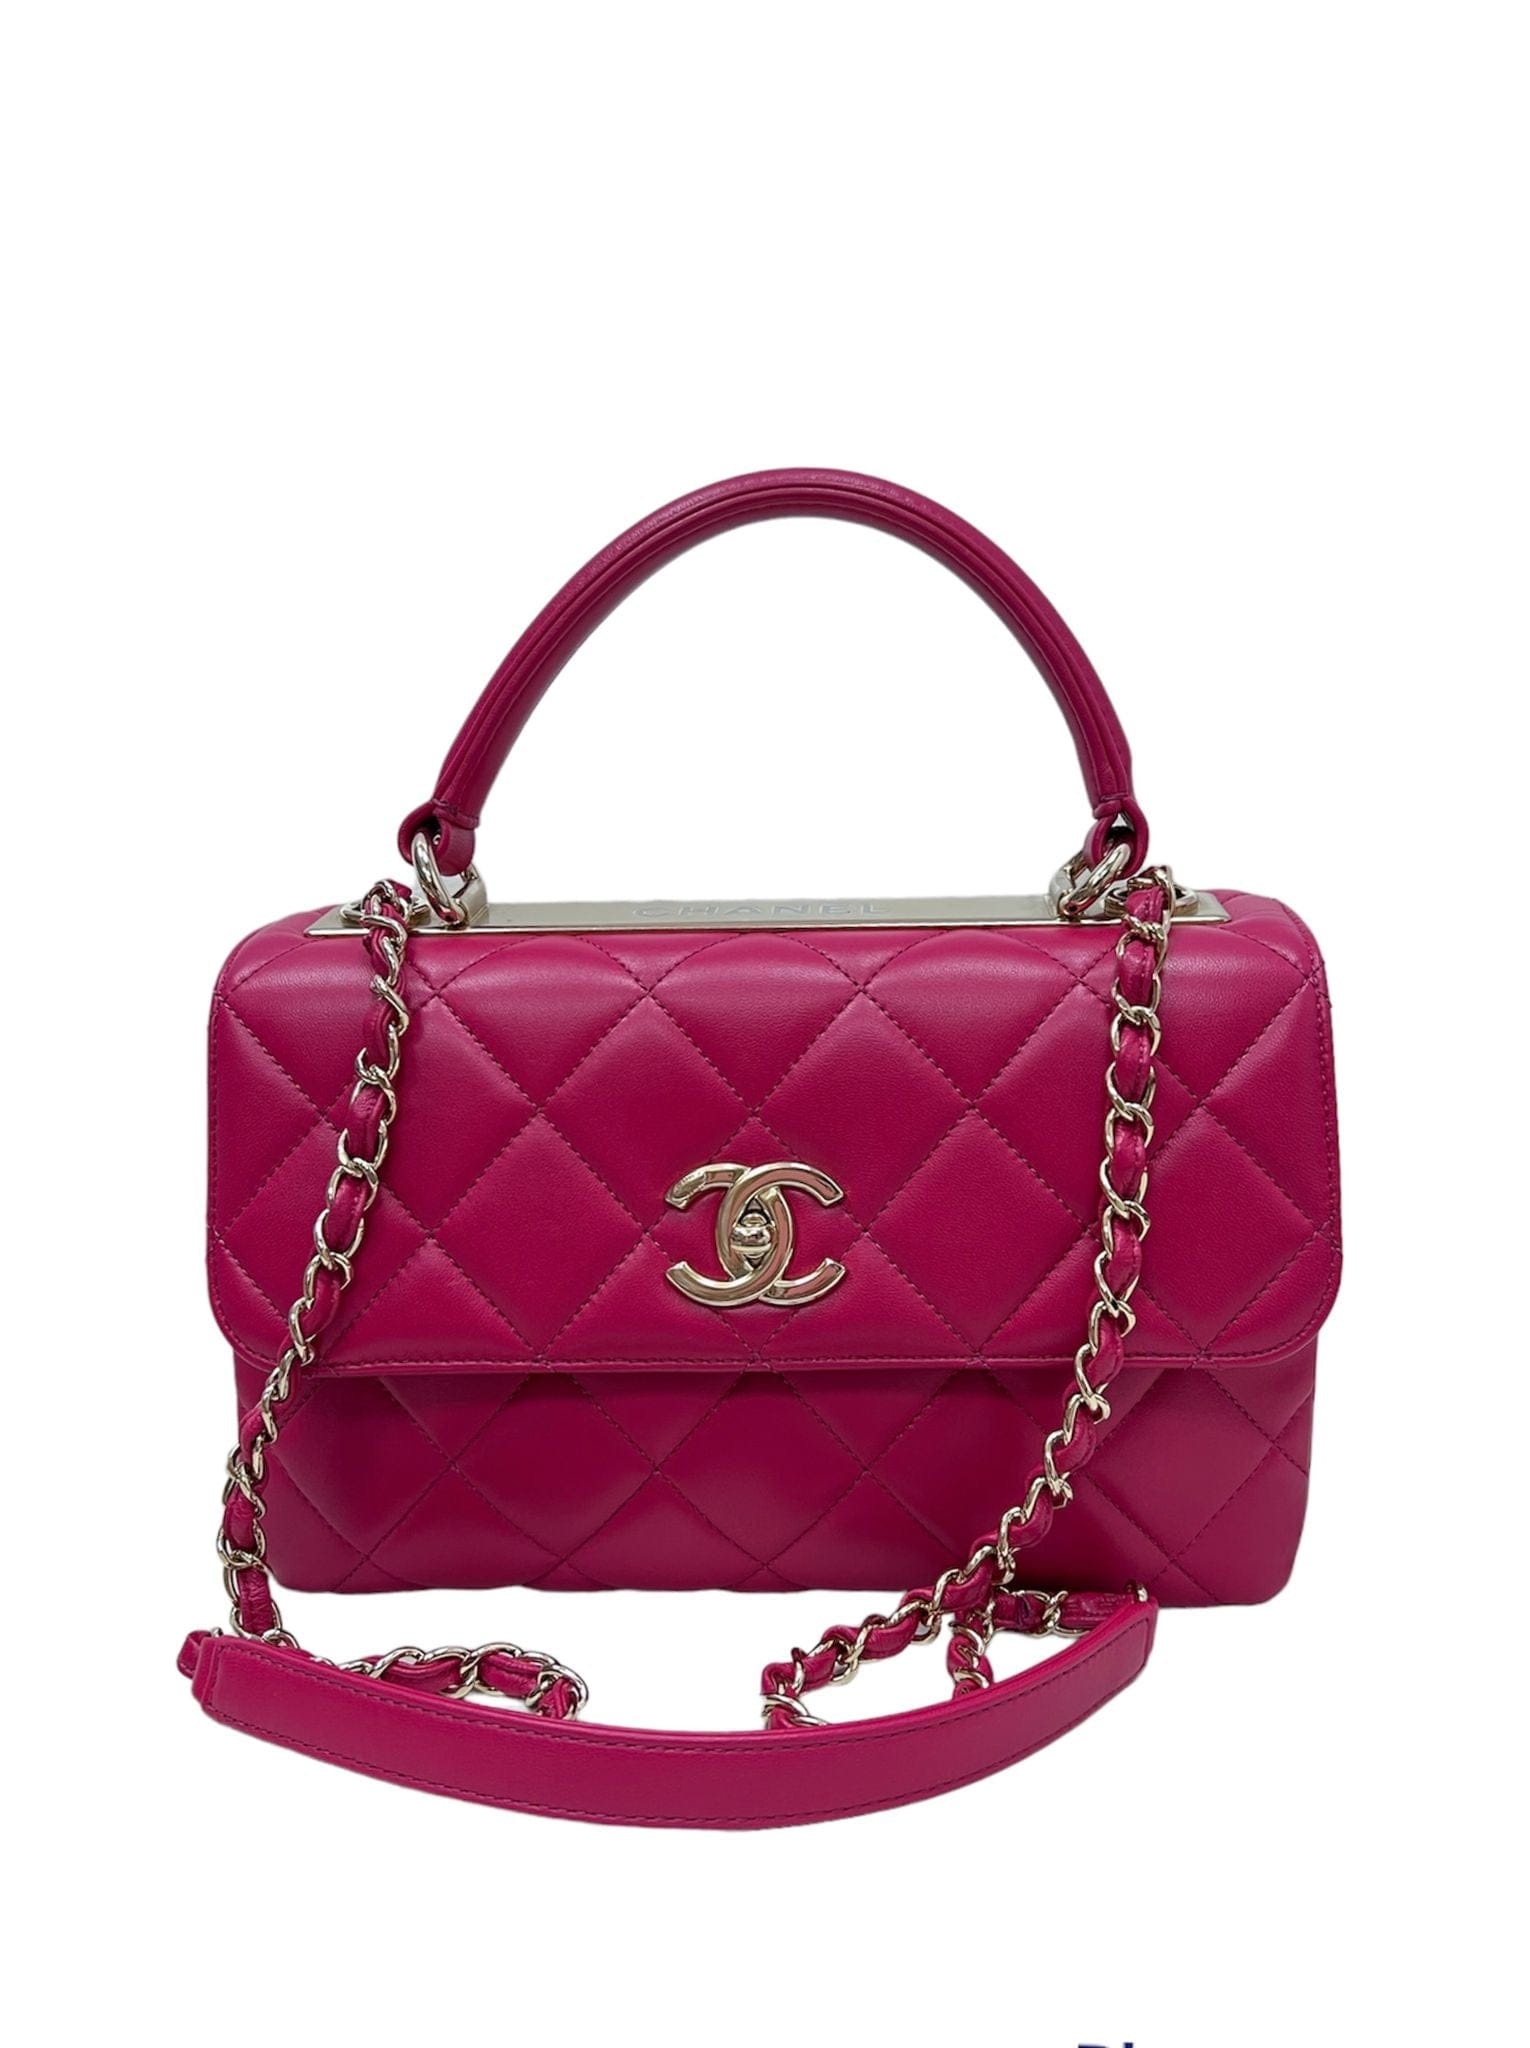 Want It Wednesday: Chanel Flap Bag in Pink Cloudy Pearly Goatskin -  PurseBlog